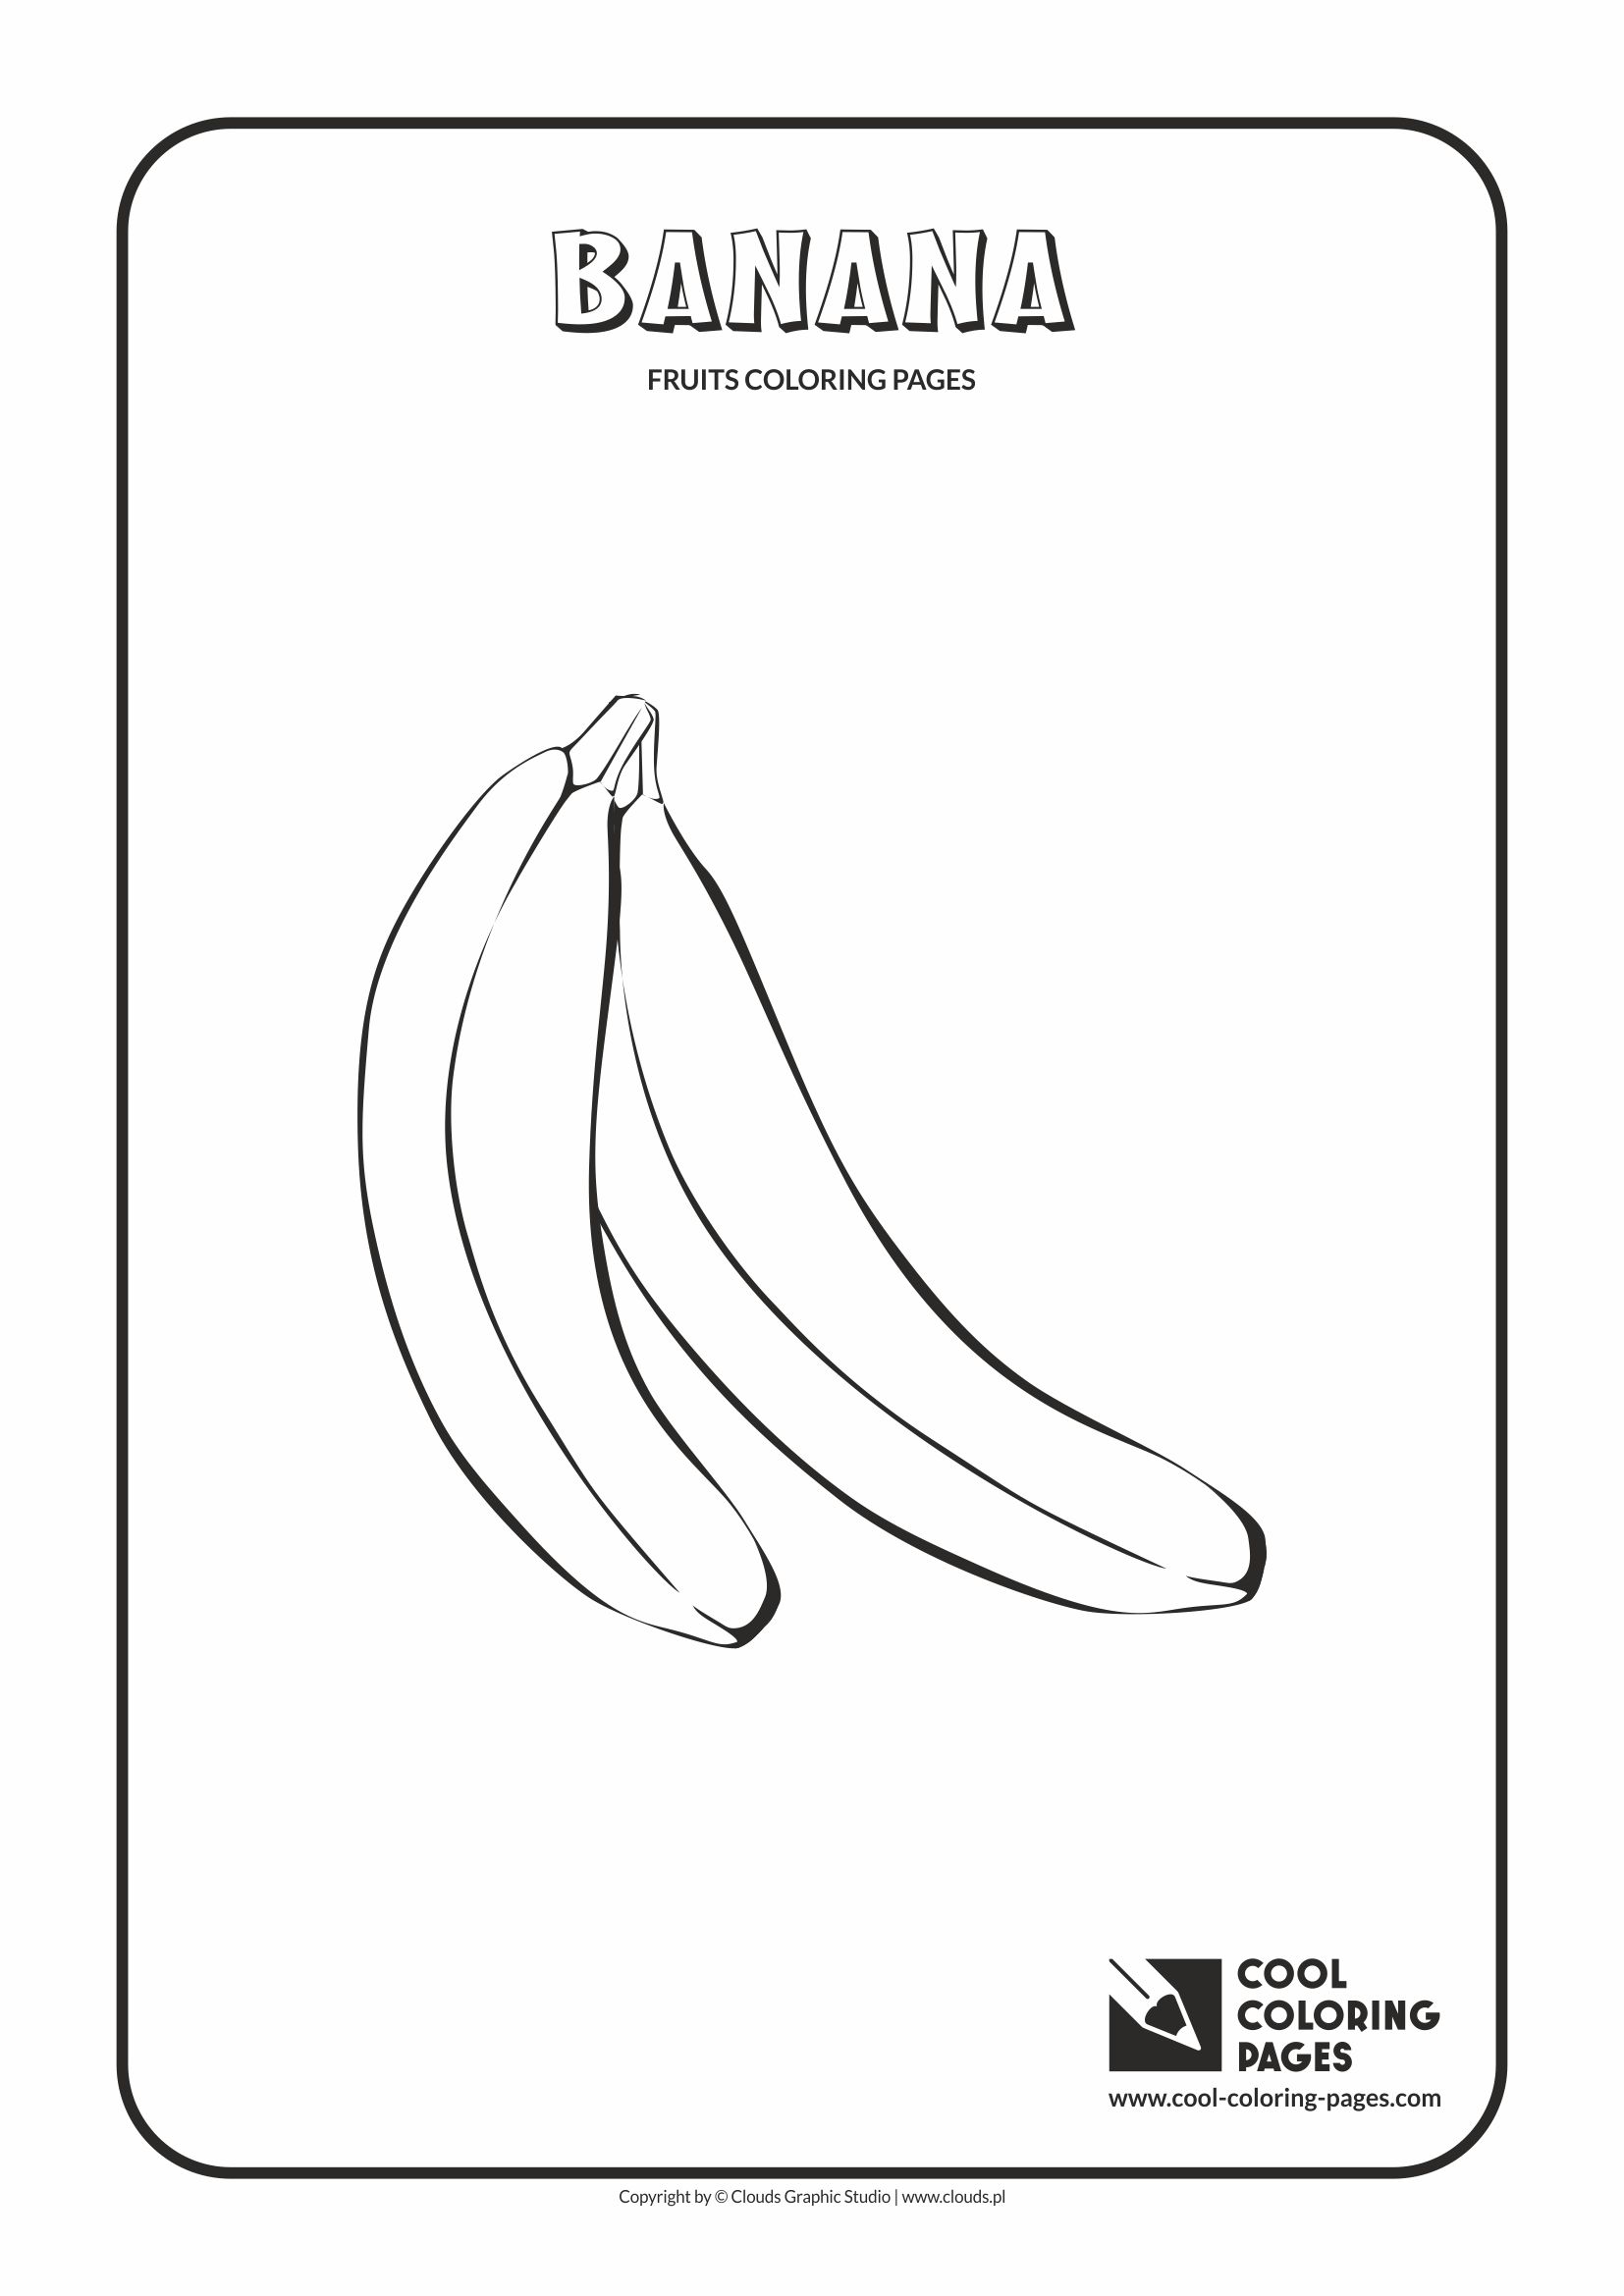 Cool Coloring Pages - Plants / Banana / Coloring page with banana